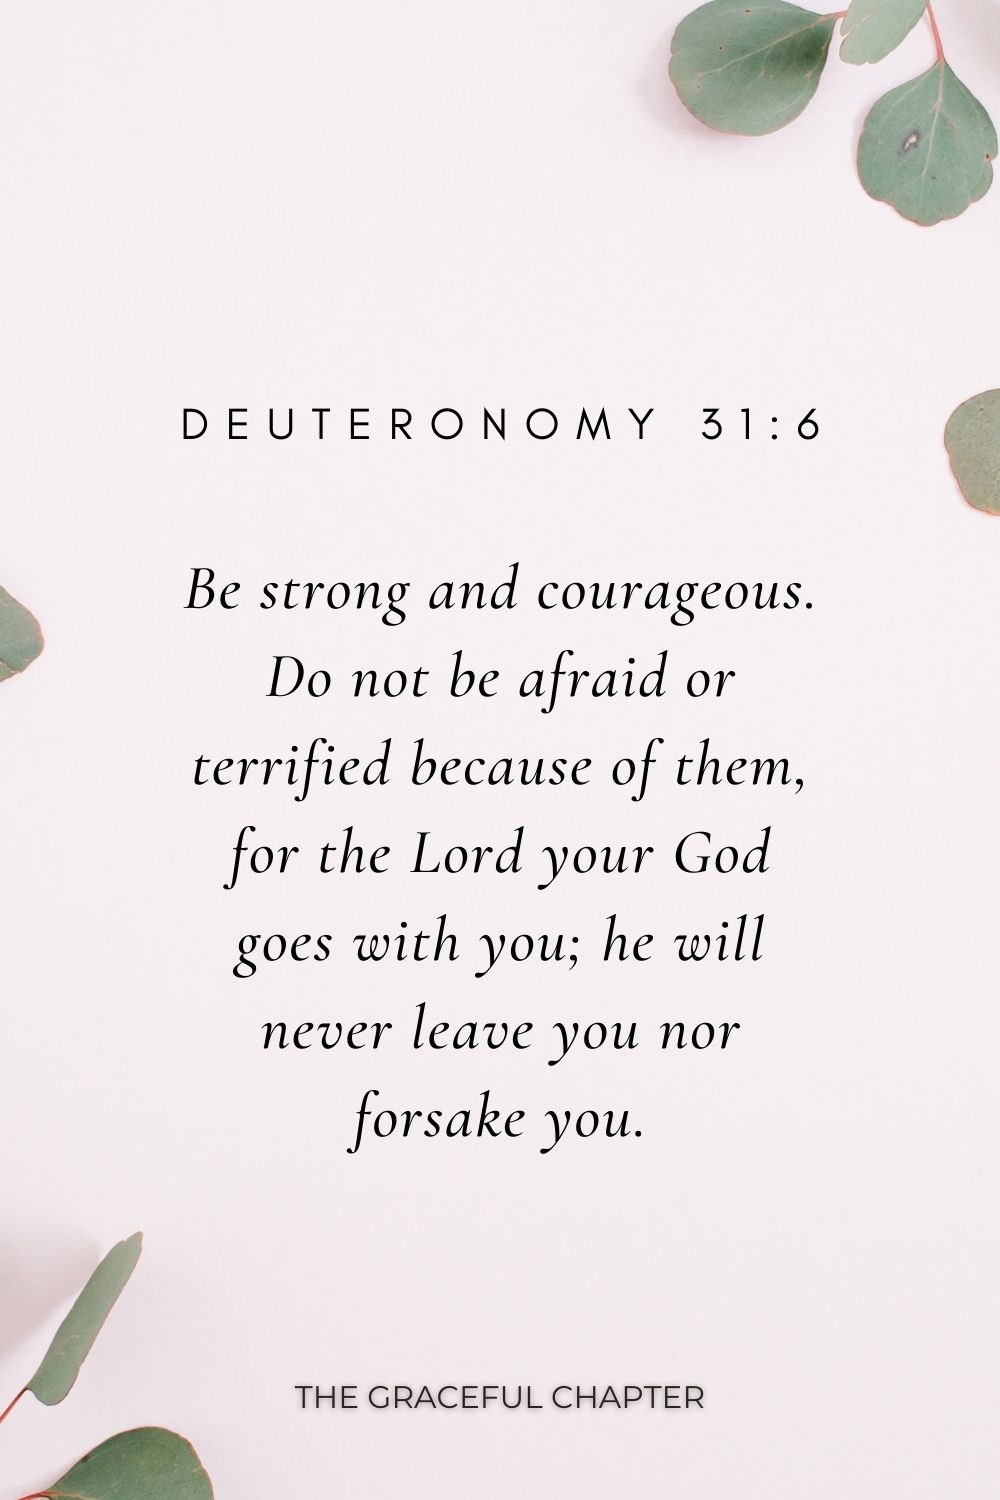 Be strong and courageous. Do not be afraid or terrified because of them, for the Lord your God goes with you; he will never leave you nor forsake you. Deuteronomy 31:6